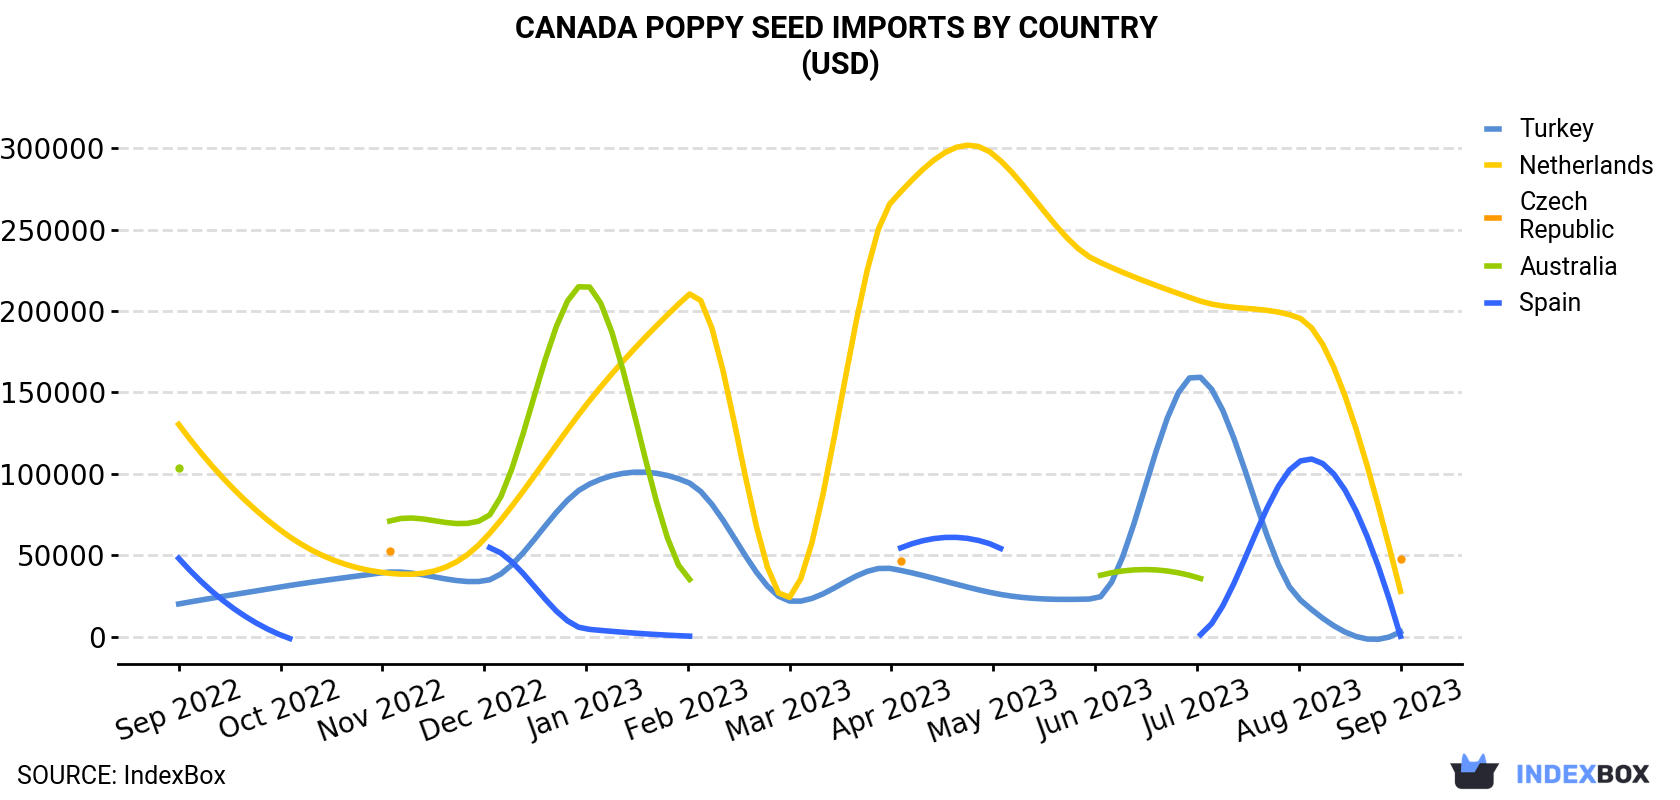 Canada Poppy Seed Imports By Country (USD)